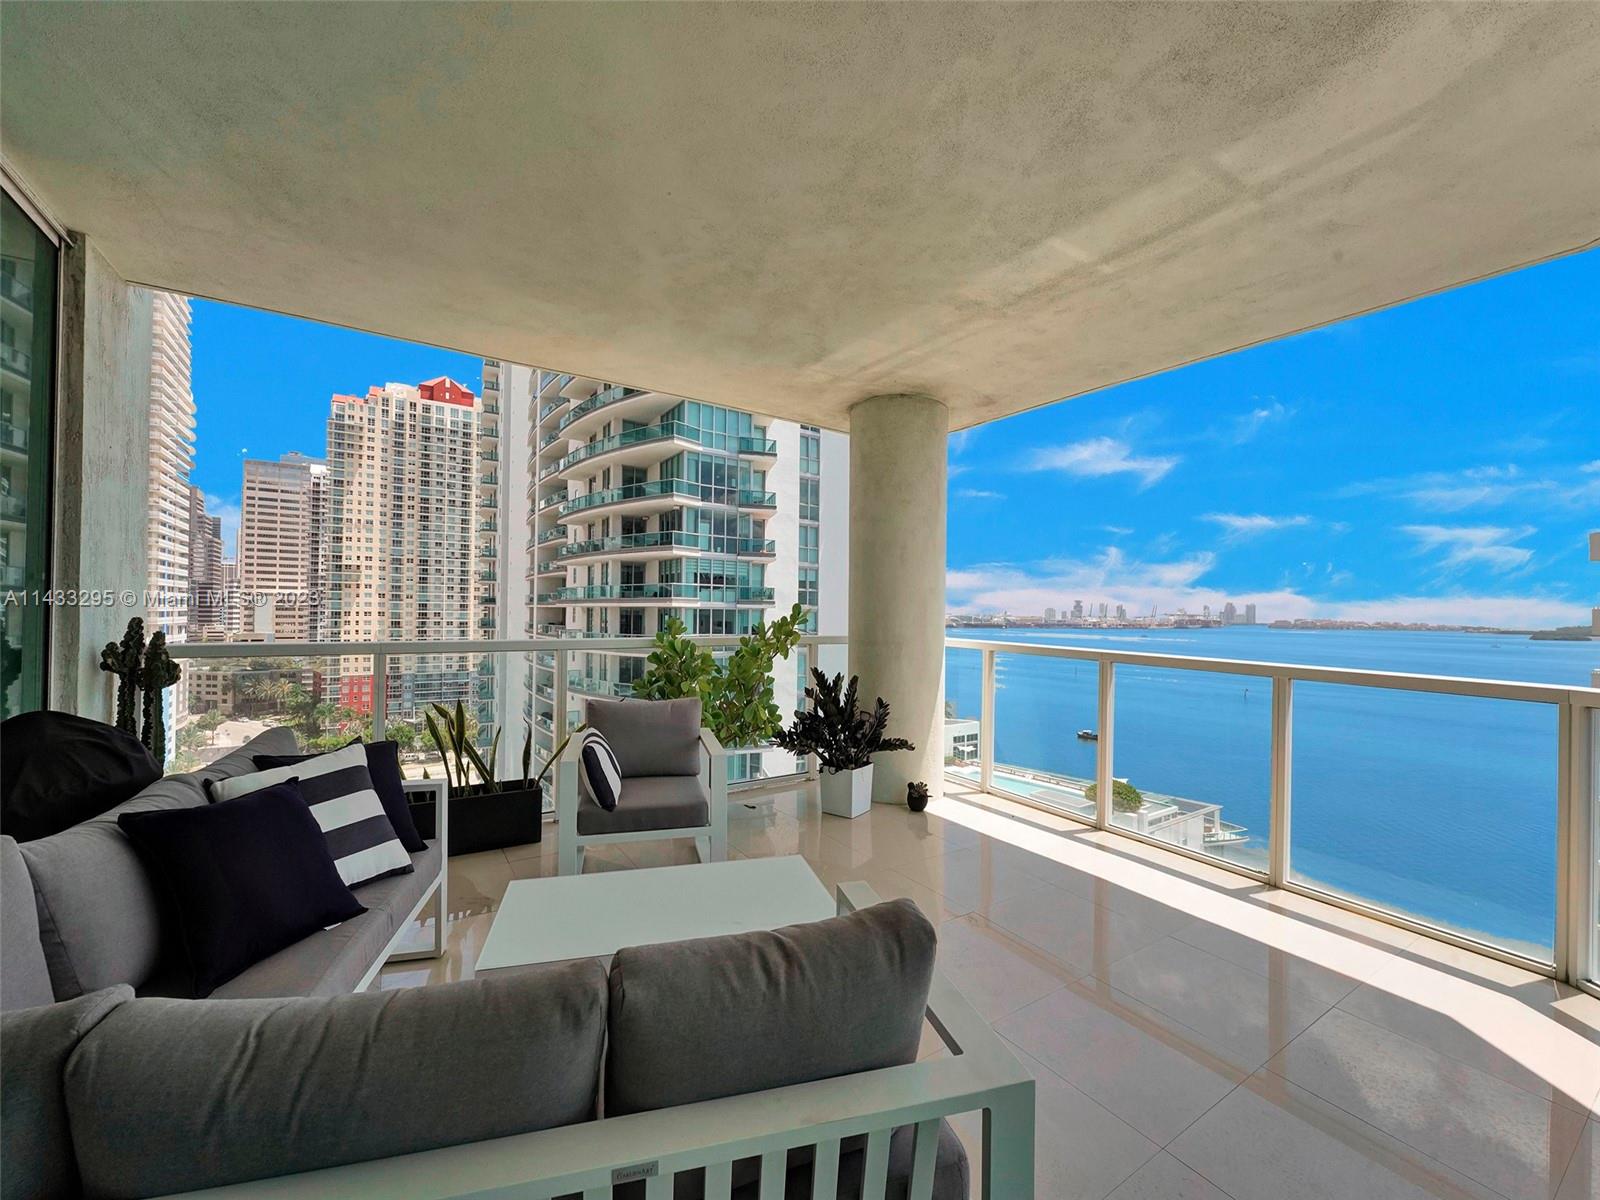 Photo 2 of The Emerald At Brickell Apt 1501 in Miami - MLS A11433295